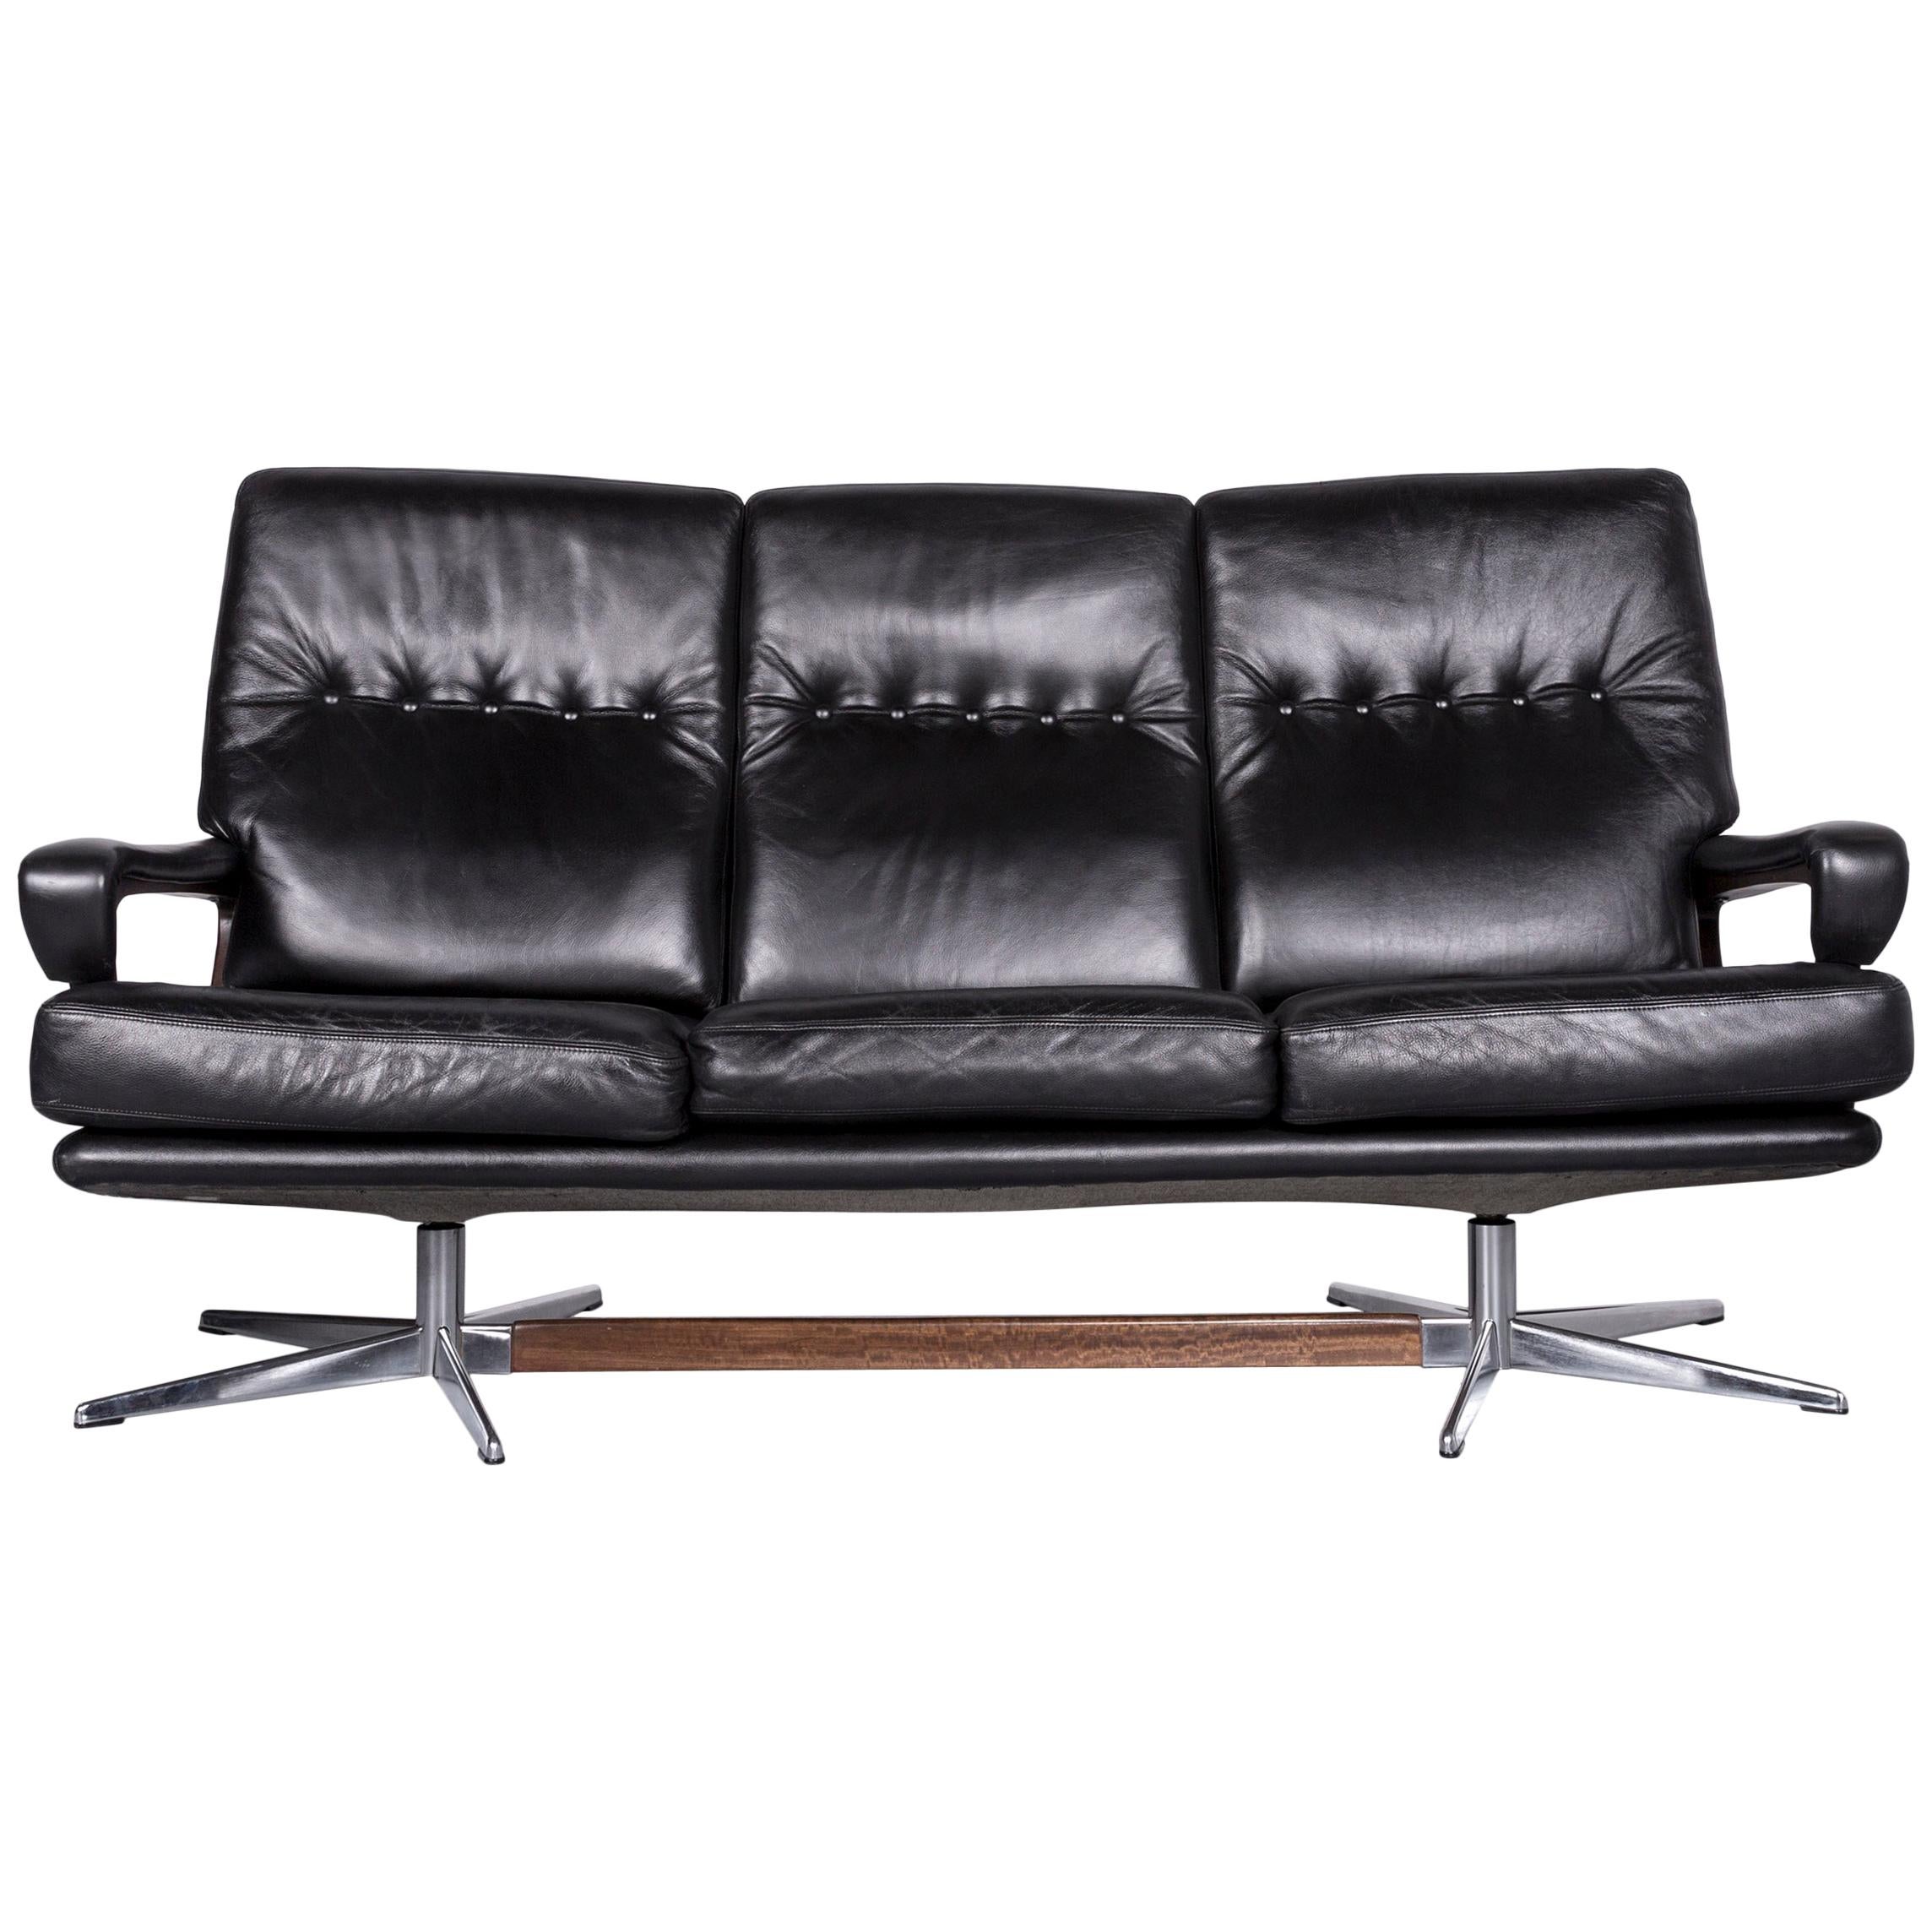 Strässle King Designer Leather Sofa Black Three-Seat Couch For Sale